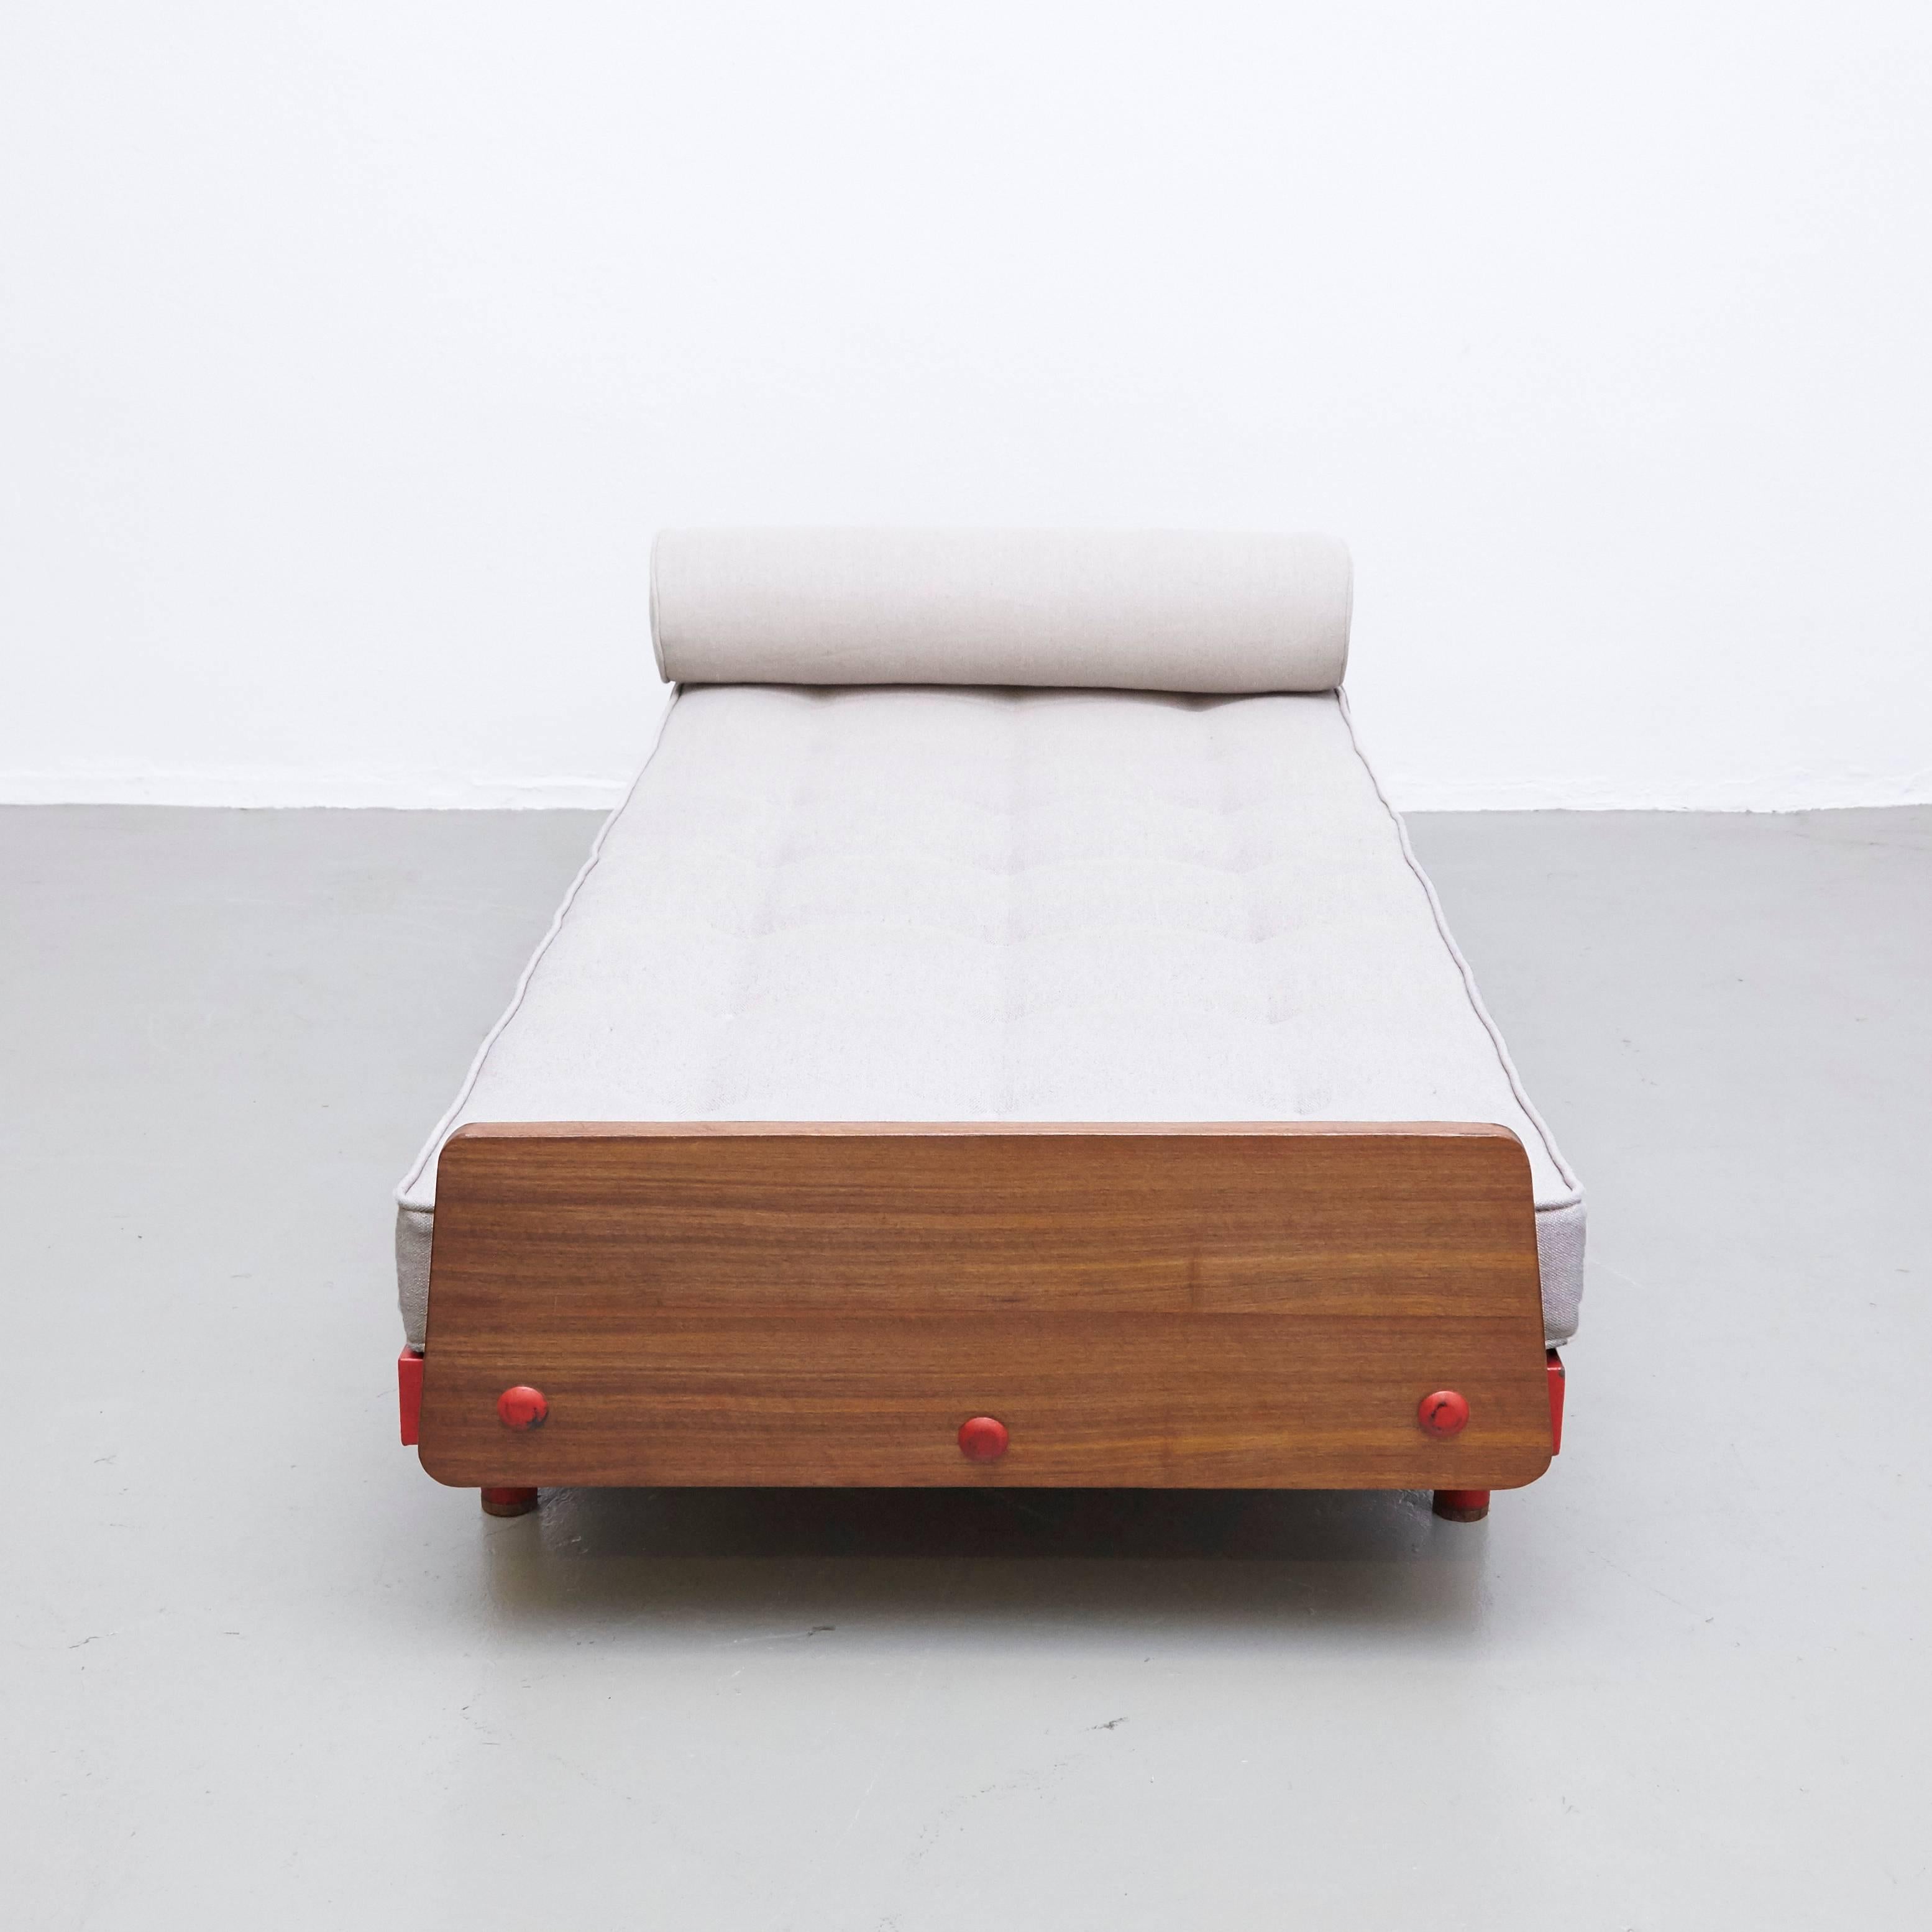 French Jean Prouve S.C.A.L. Daybed, circa 1950